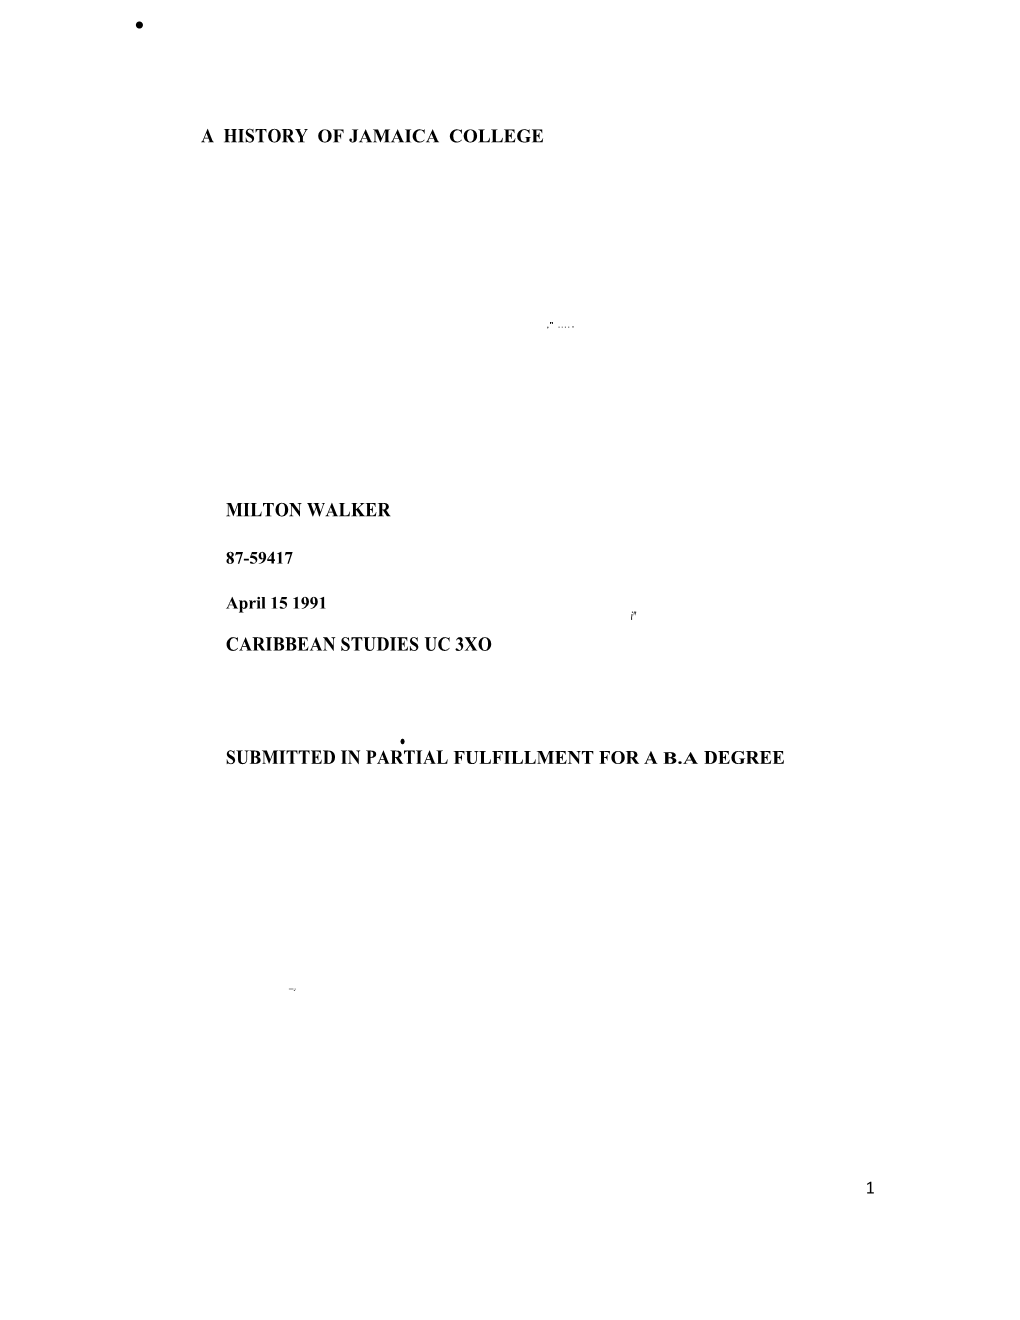 Milton Walker Caribbean Studies Uc 3Xo Submitted in Partial Fulfillment for a Ba Degree